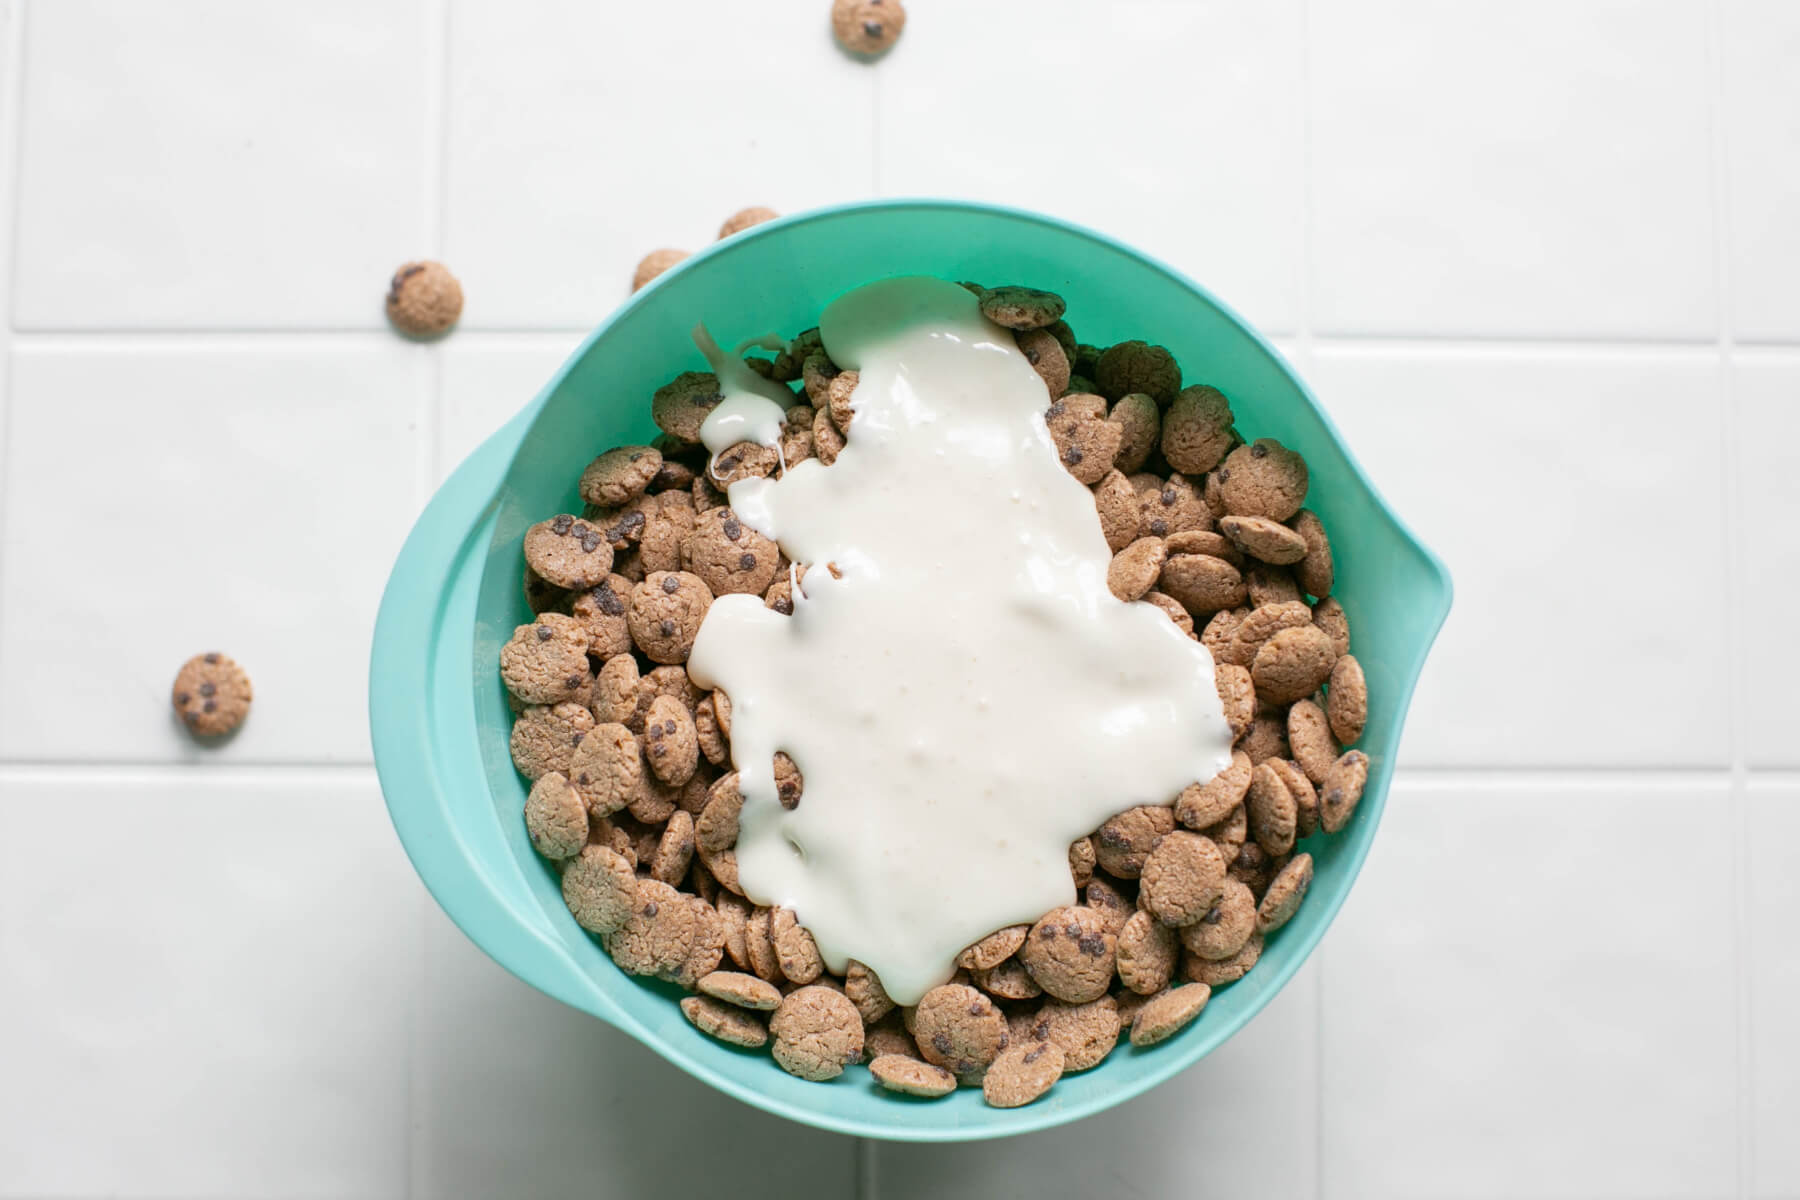 mix together the cookie crisp cereal with melted marshmallows